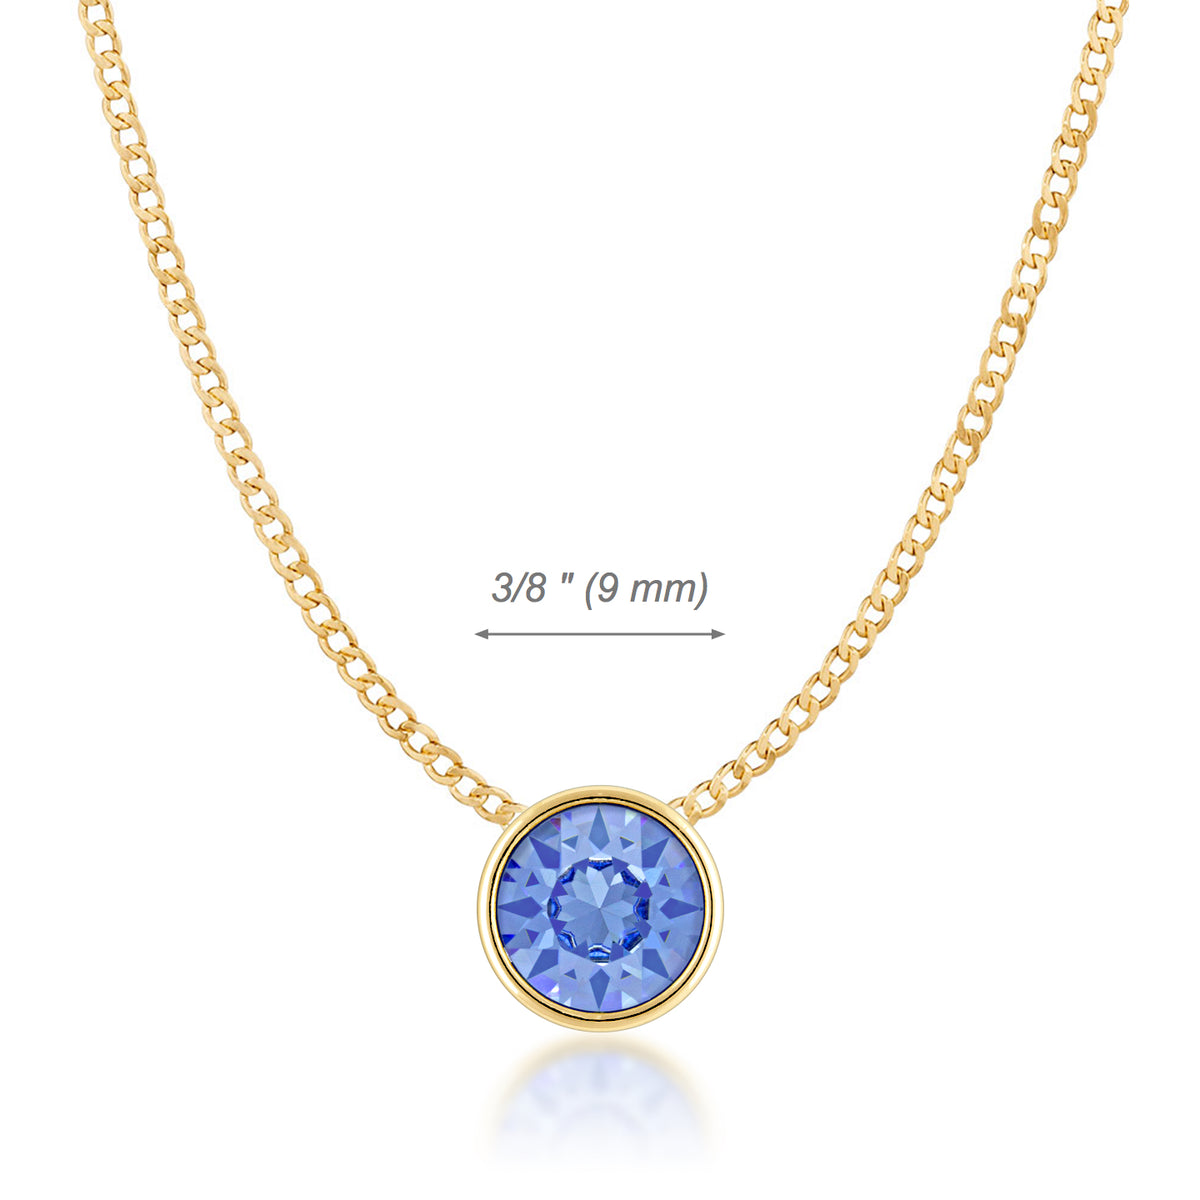 Harley Small Pendant Necklace with Blue Light Sapphire Round Crystals from Swarovski Gold Plated - Ed Heart